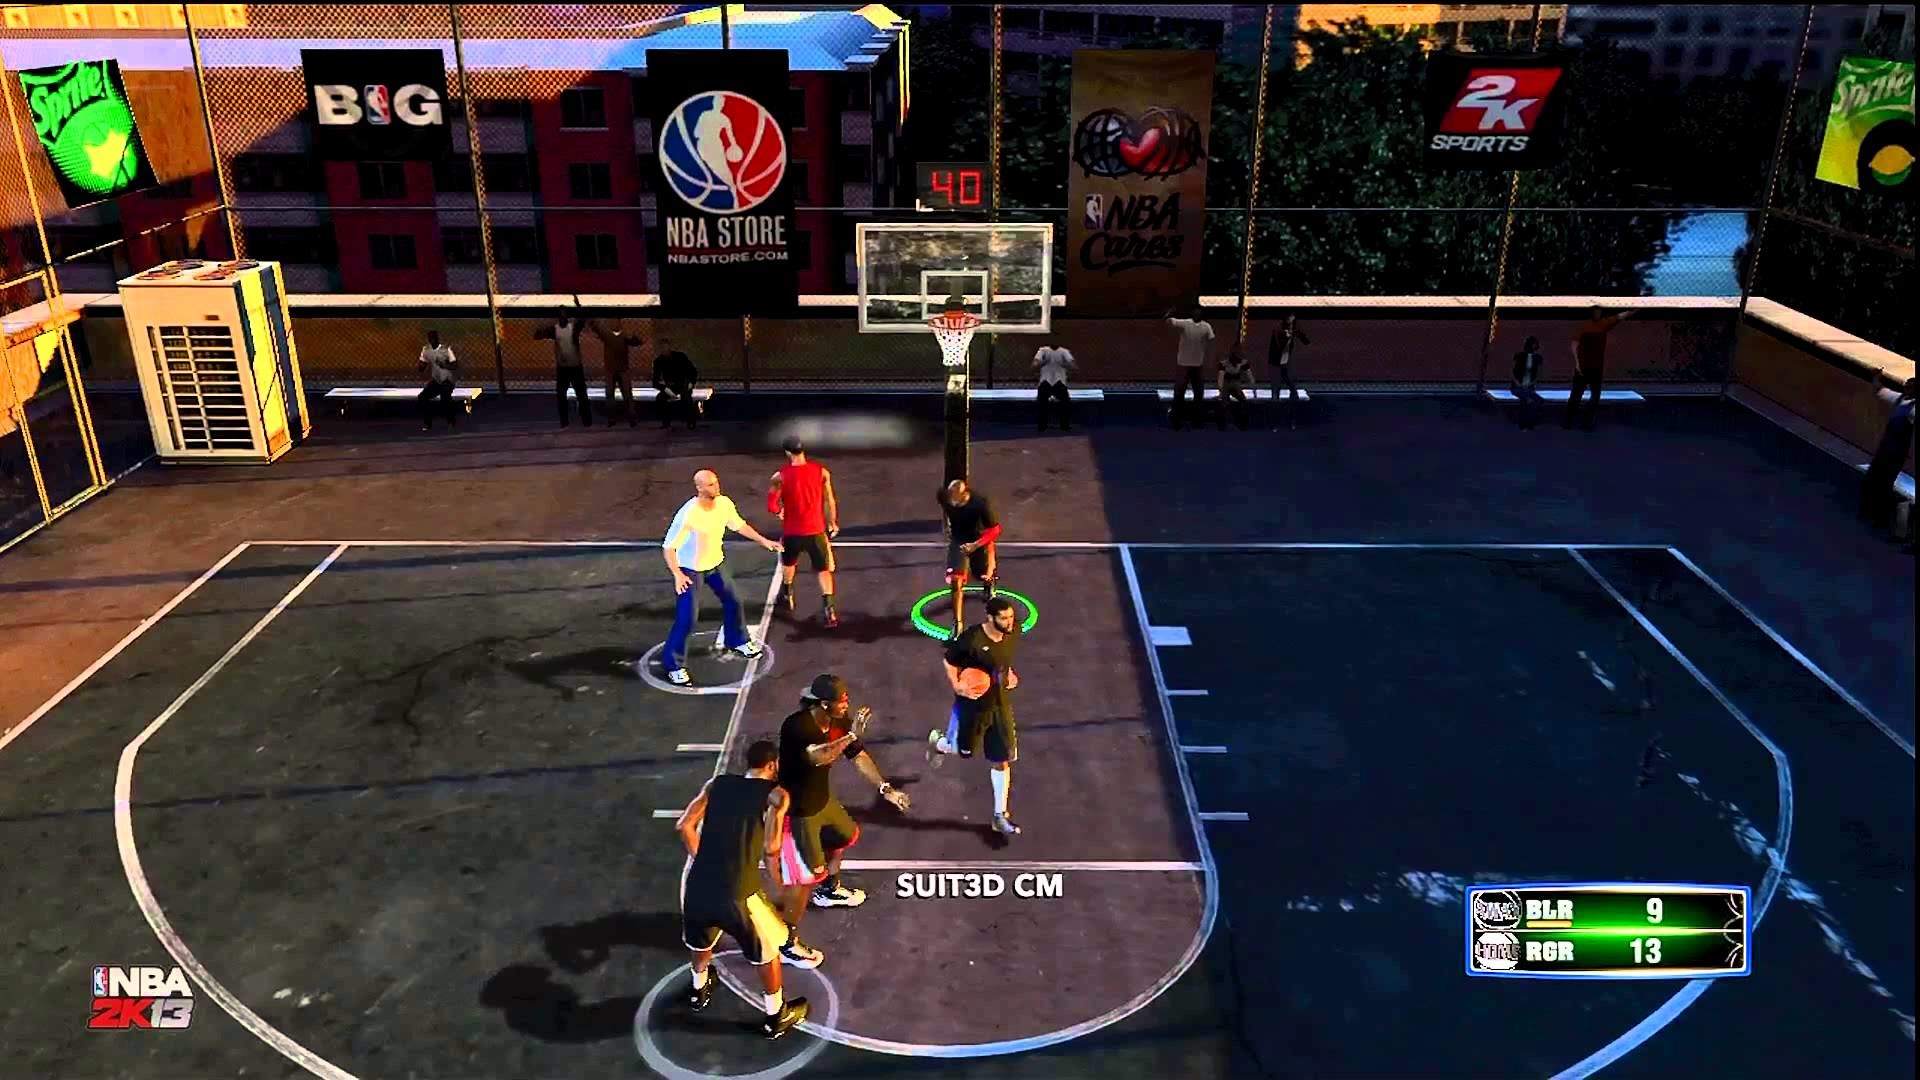 1920x1080 NBA 2K13 3v3 Blacktop Featuring the MoneyTeam - Sub Session Featuring  K.Spade - YouTube